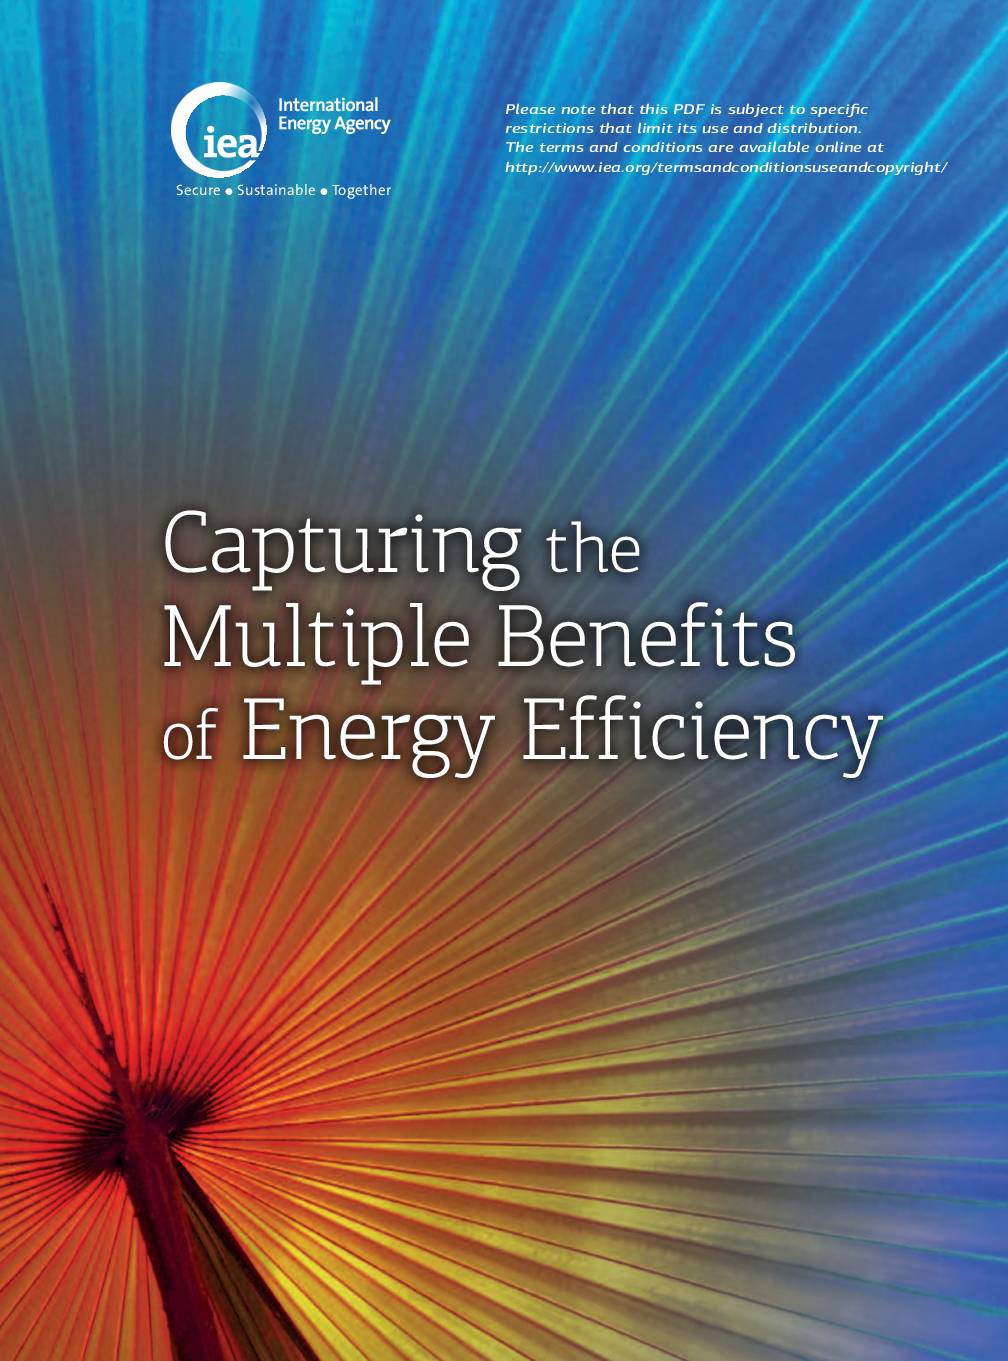 Capturing the Multiple Benefits of Energy Efficiency